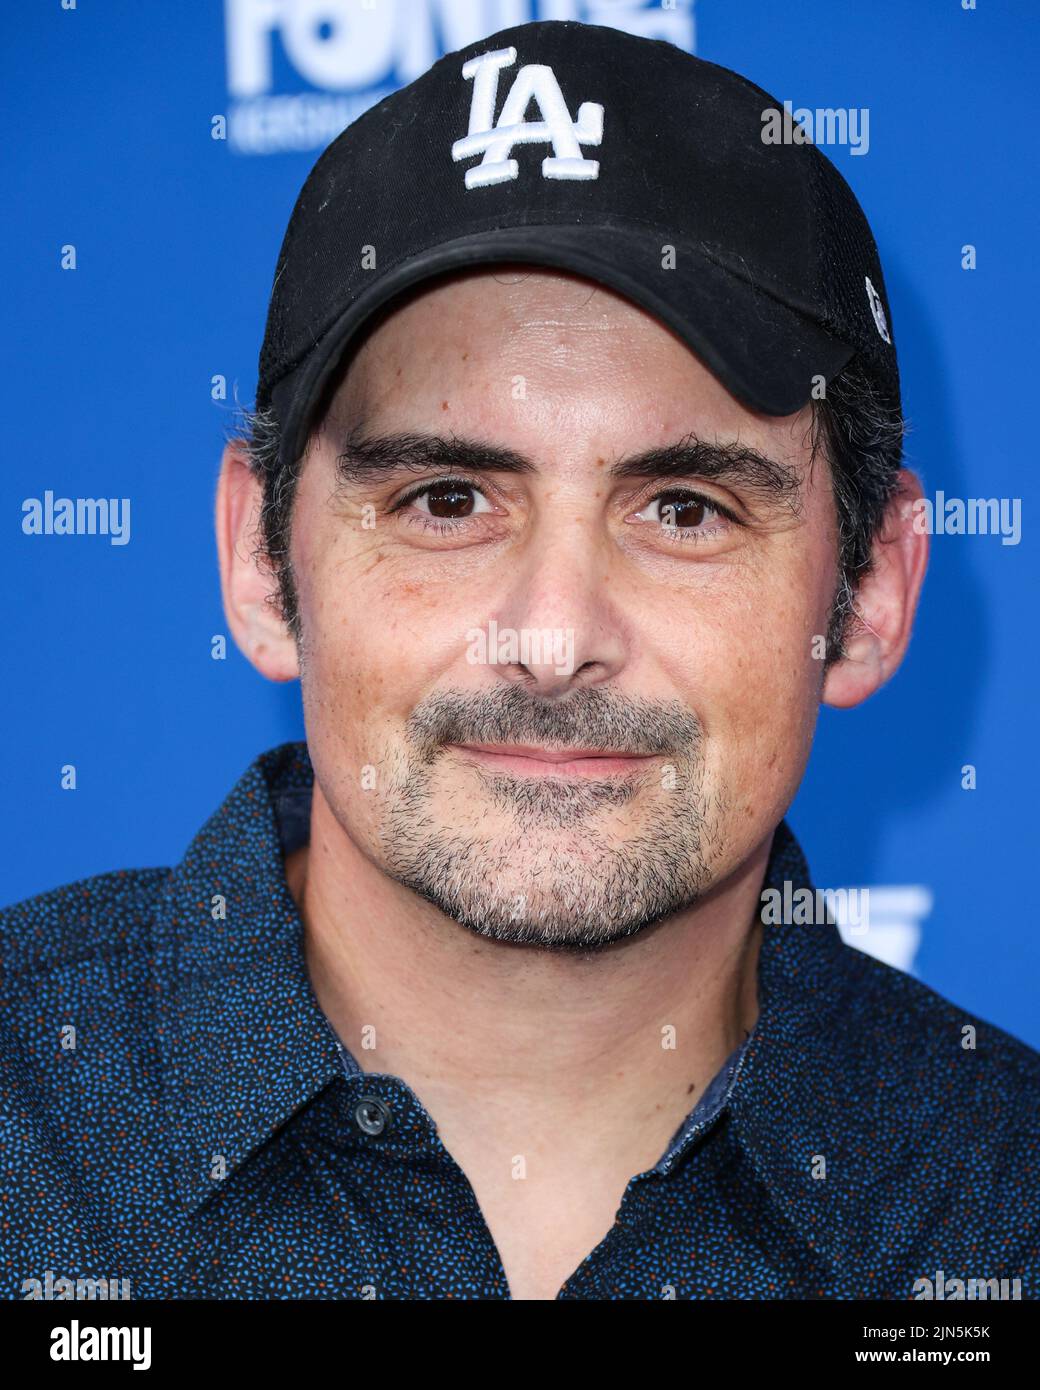 ELYSIAN PARK, LOS ANGELES, CALIFORNIA, USA - AUGUST 08: American singer-songwriter Brad Paisley arrives at Kershaw's Challenge Ping Pong 4 Purpose 2022 held at Dodger Stadium on August 8, 2022 in Elysian Park, Los Angeles, California, United States. (Photo by Xavier Collin/Image Press Agency) Stock Photo